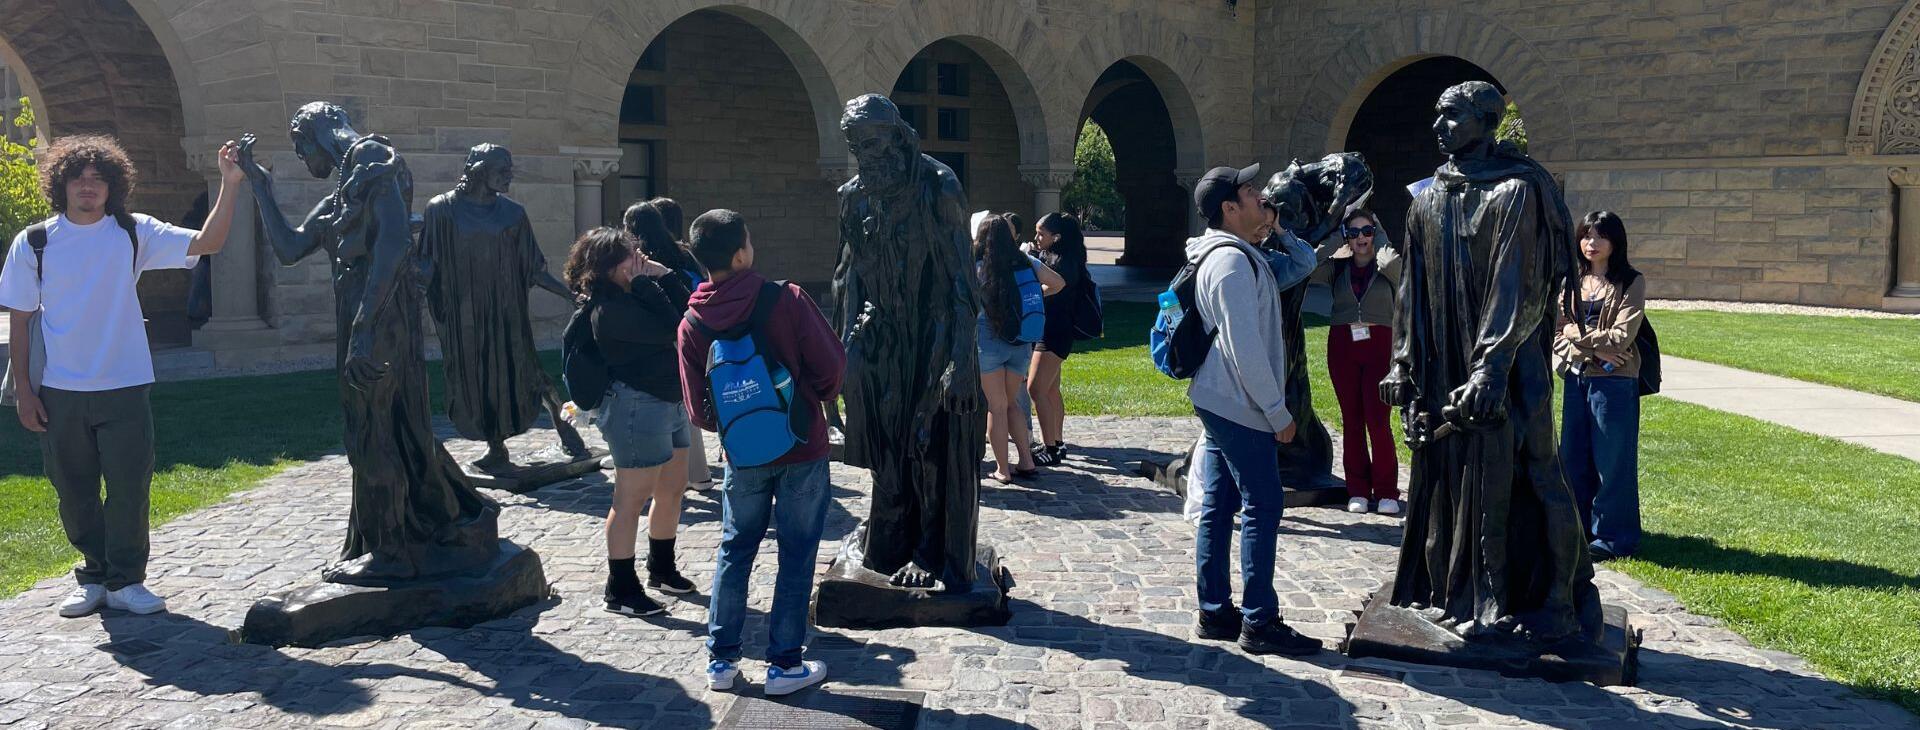 Northern Cal Colleges Tour: Burghers of Calais, Stanford Univ.